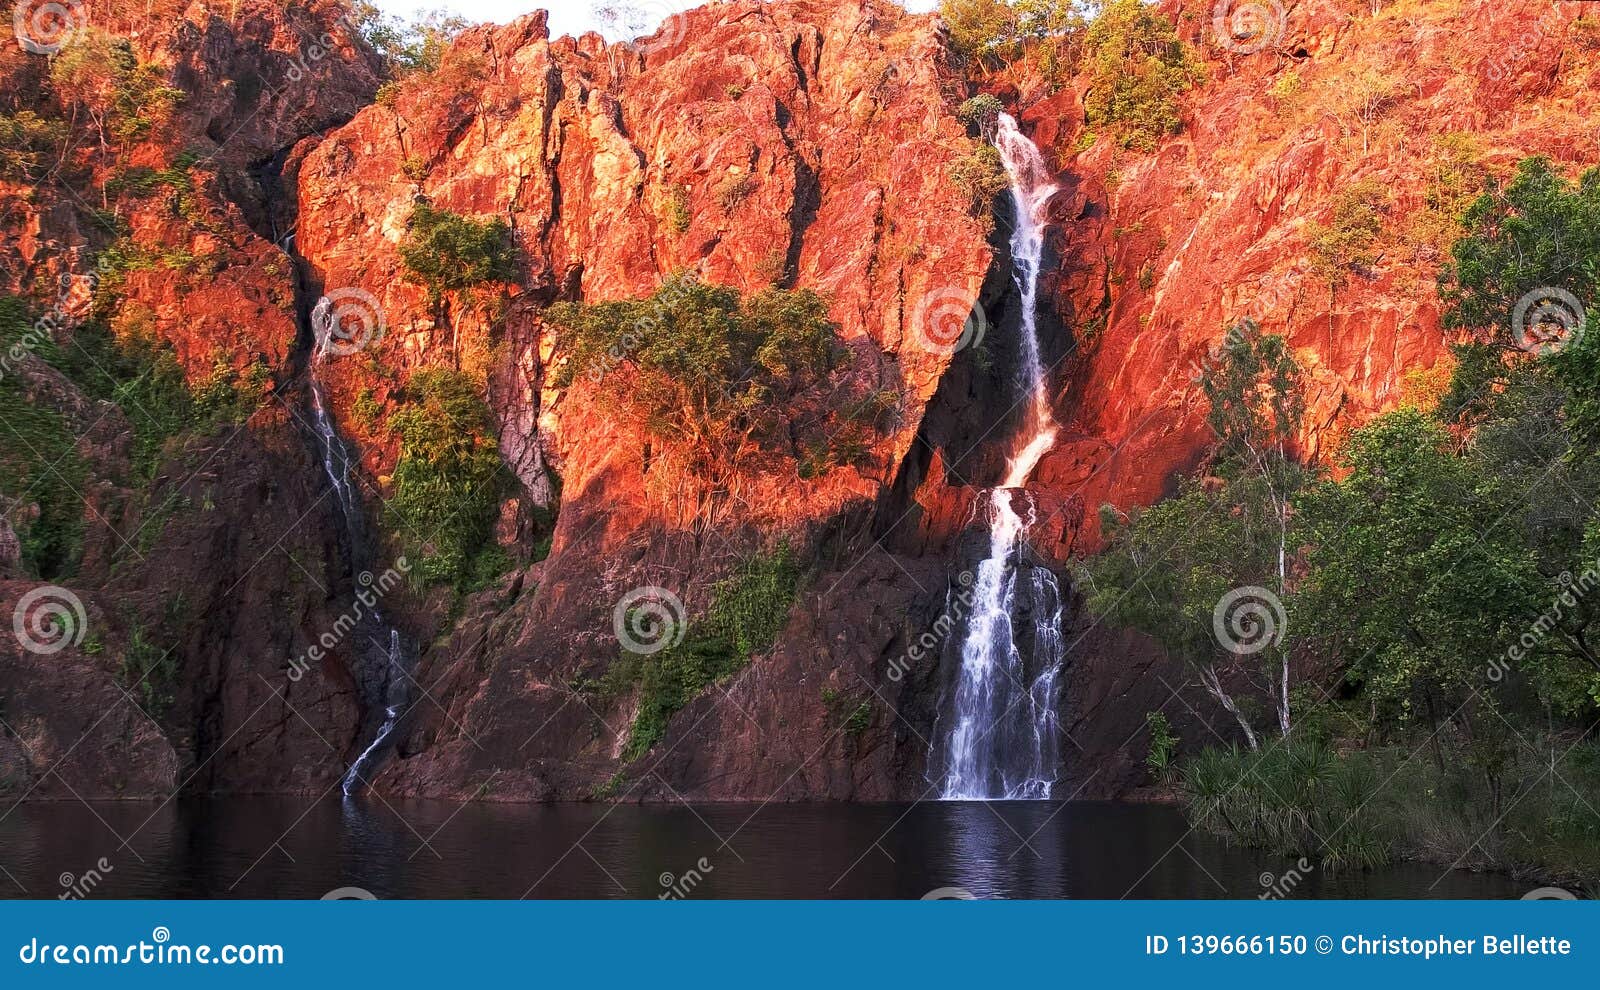 setting sun turns the cliffs at wangi waterfalls in litchfield national park a brilliant red